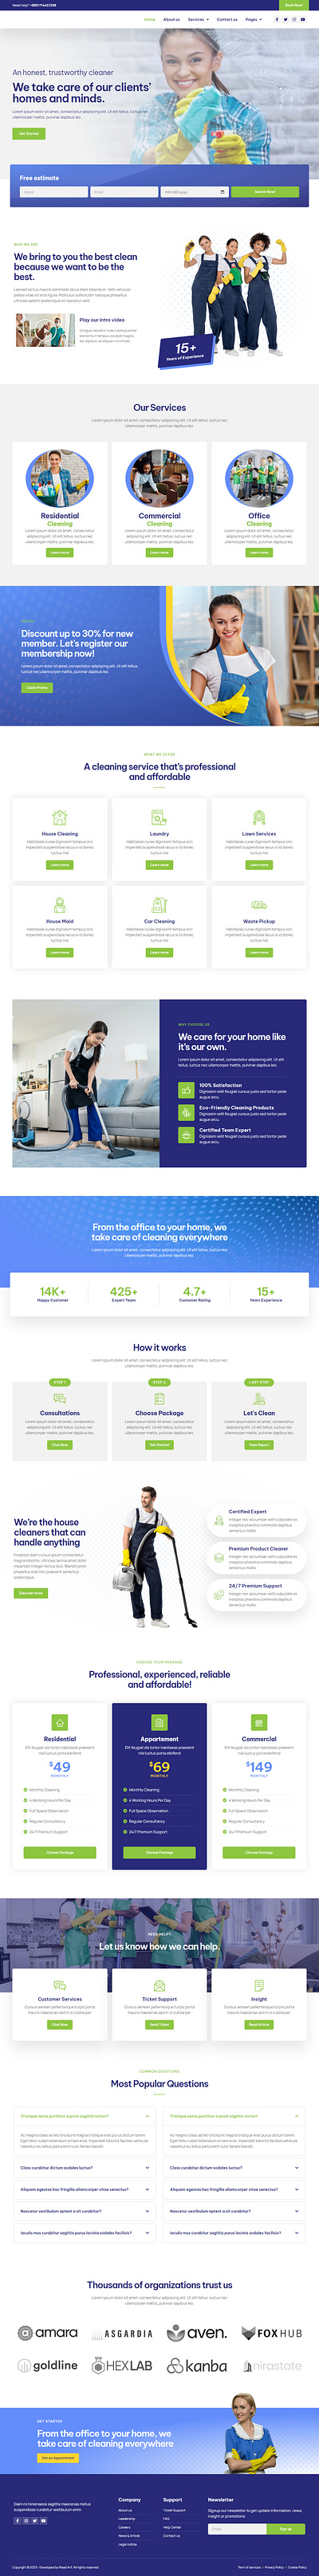 Cleaning Service Company Website agency website agency website design design designer elementor designer elementor landng elementor pro elementor website landing page responsive website sales page ux ui website designer website example website sample wordpress wordpress designer wordpress elementor wordpress landing wordpress website